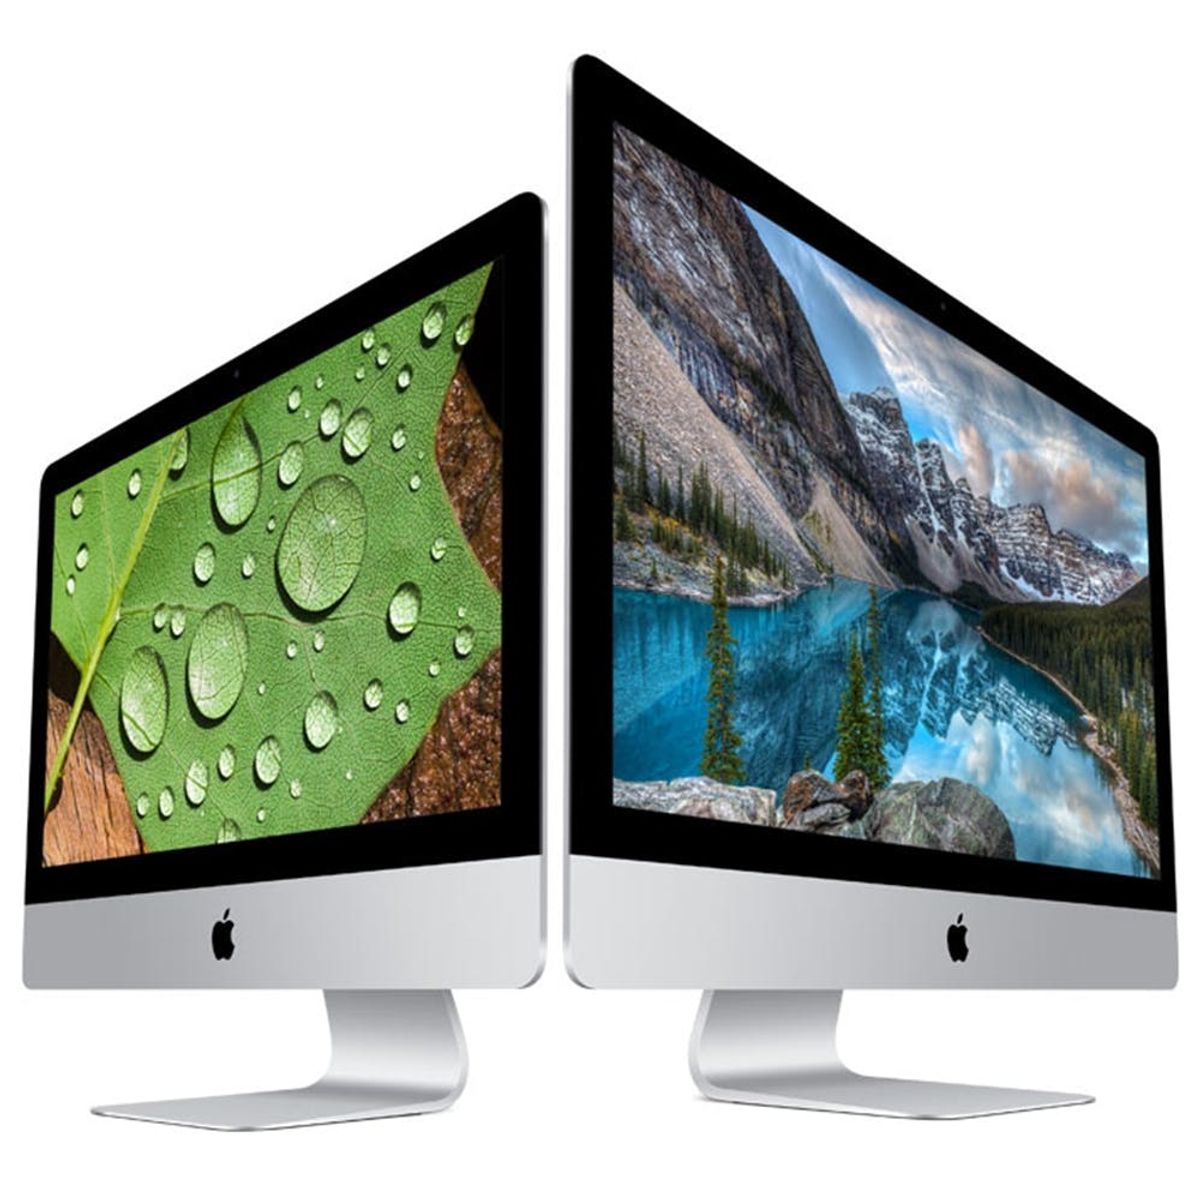 Apparently New Desktop Macs Are On Their Way